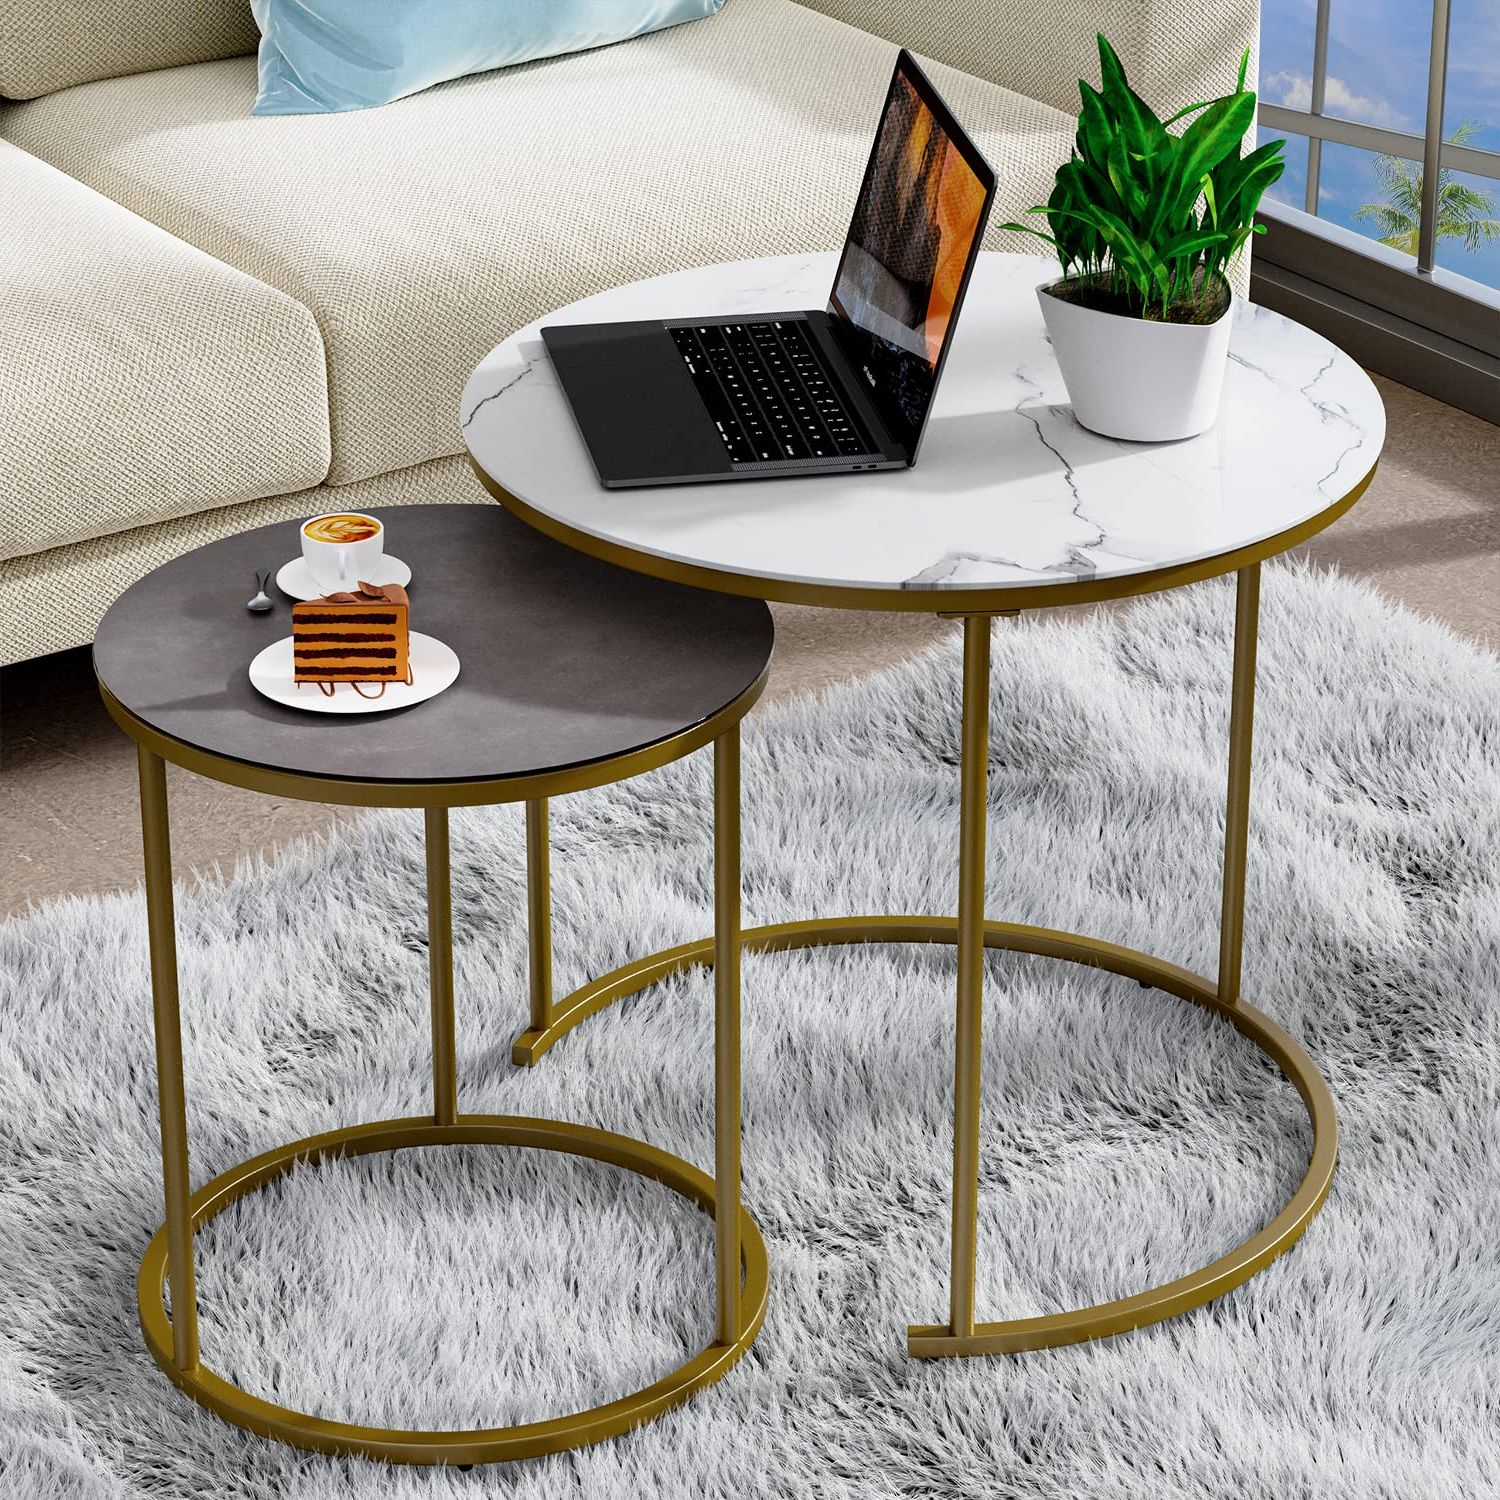 Best And Newest Waterproof Coffee Tables Intended For Amazon: Moncot Modern Nesting Round Coffee Tables Set Of 2 Tempered  Glass Faux Marble Finished Texture & Dark Gray Finish Top Waterproof  Outdoor And Indoor Nested End Tables Stacking Table : Home (View 3 of 10)